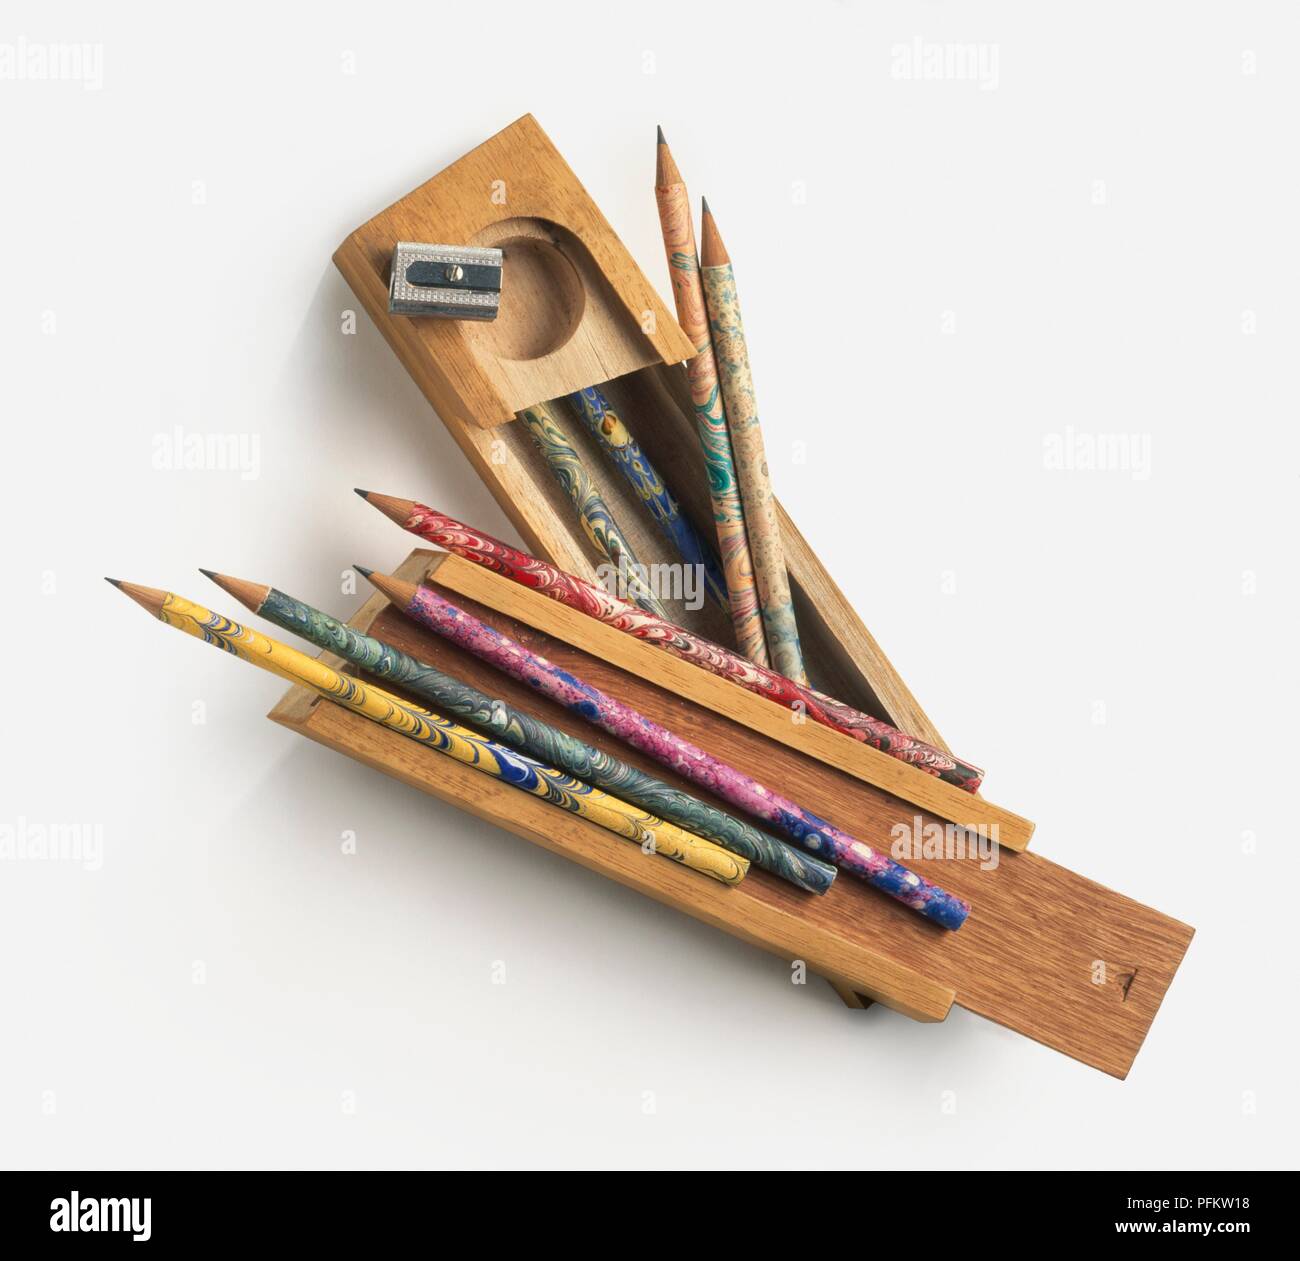 Old fashioned wood pencil case, pencils, and pencil sharpener Stock Photo